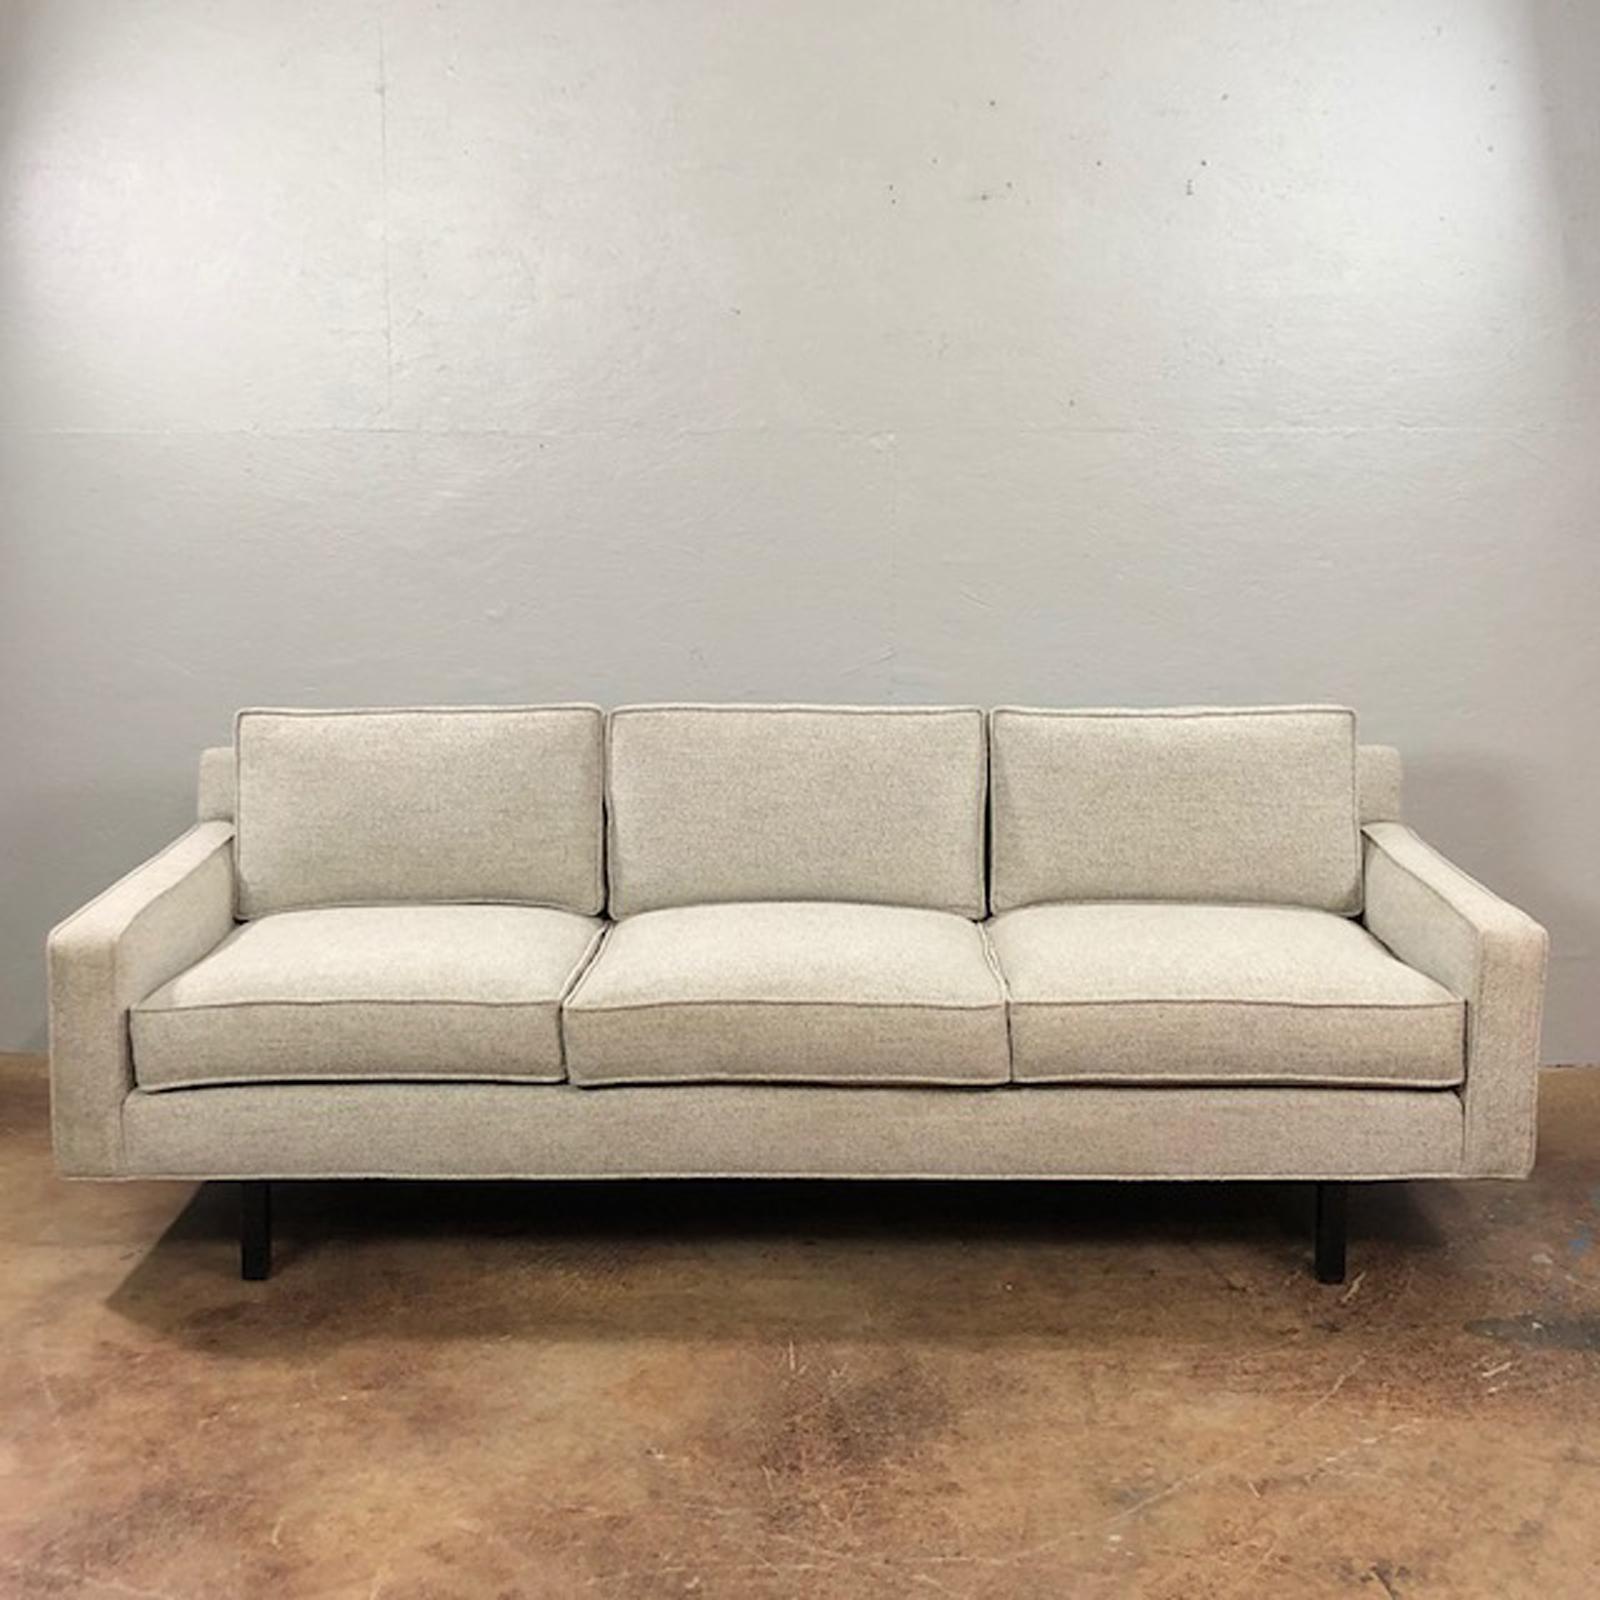 Reupholstered three-seat Paul McCobb designed sofa for the Directional Design line by Sedgefield. Clean lines. Sophisticated.